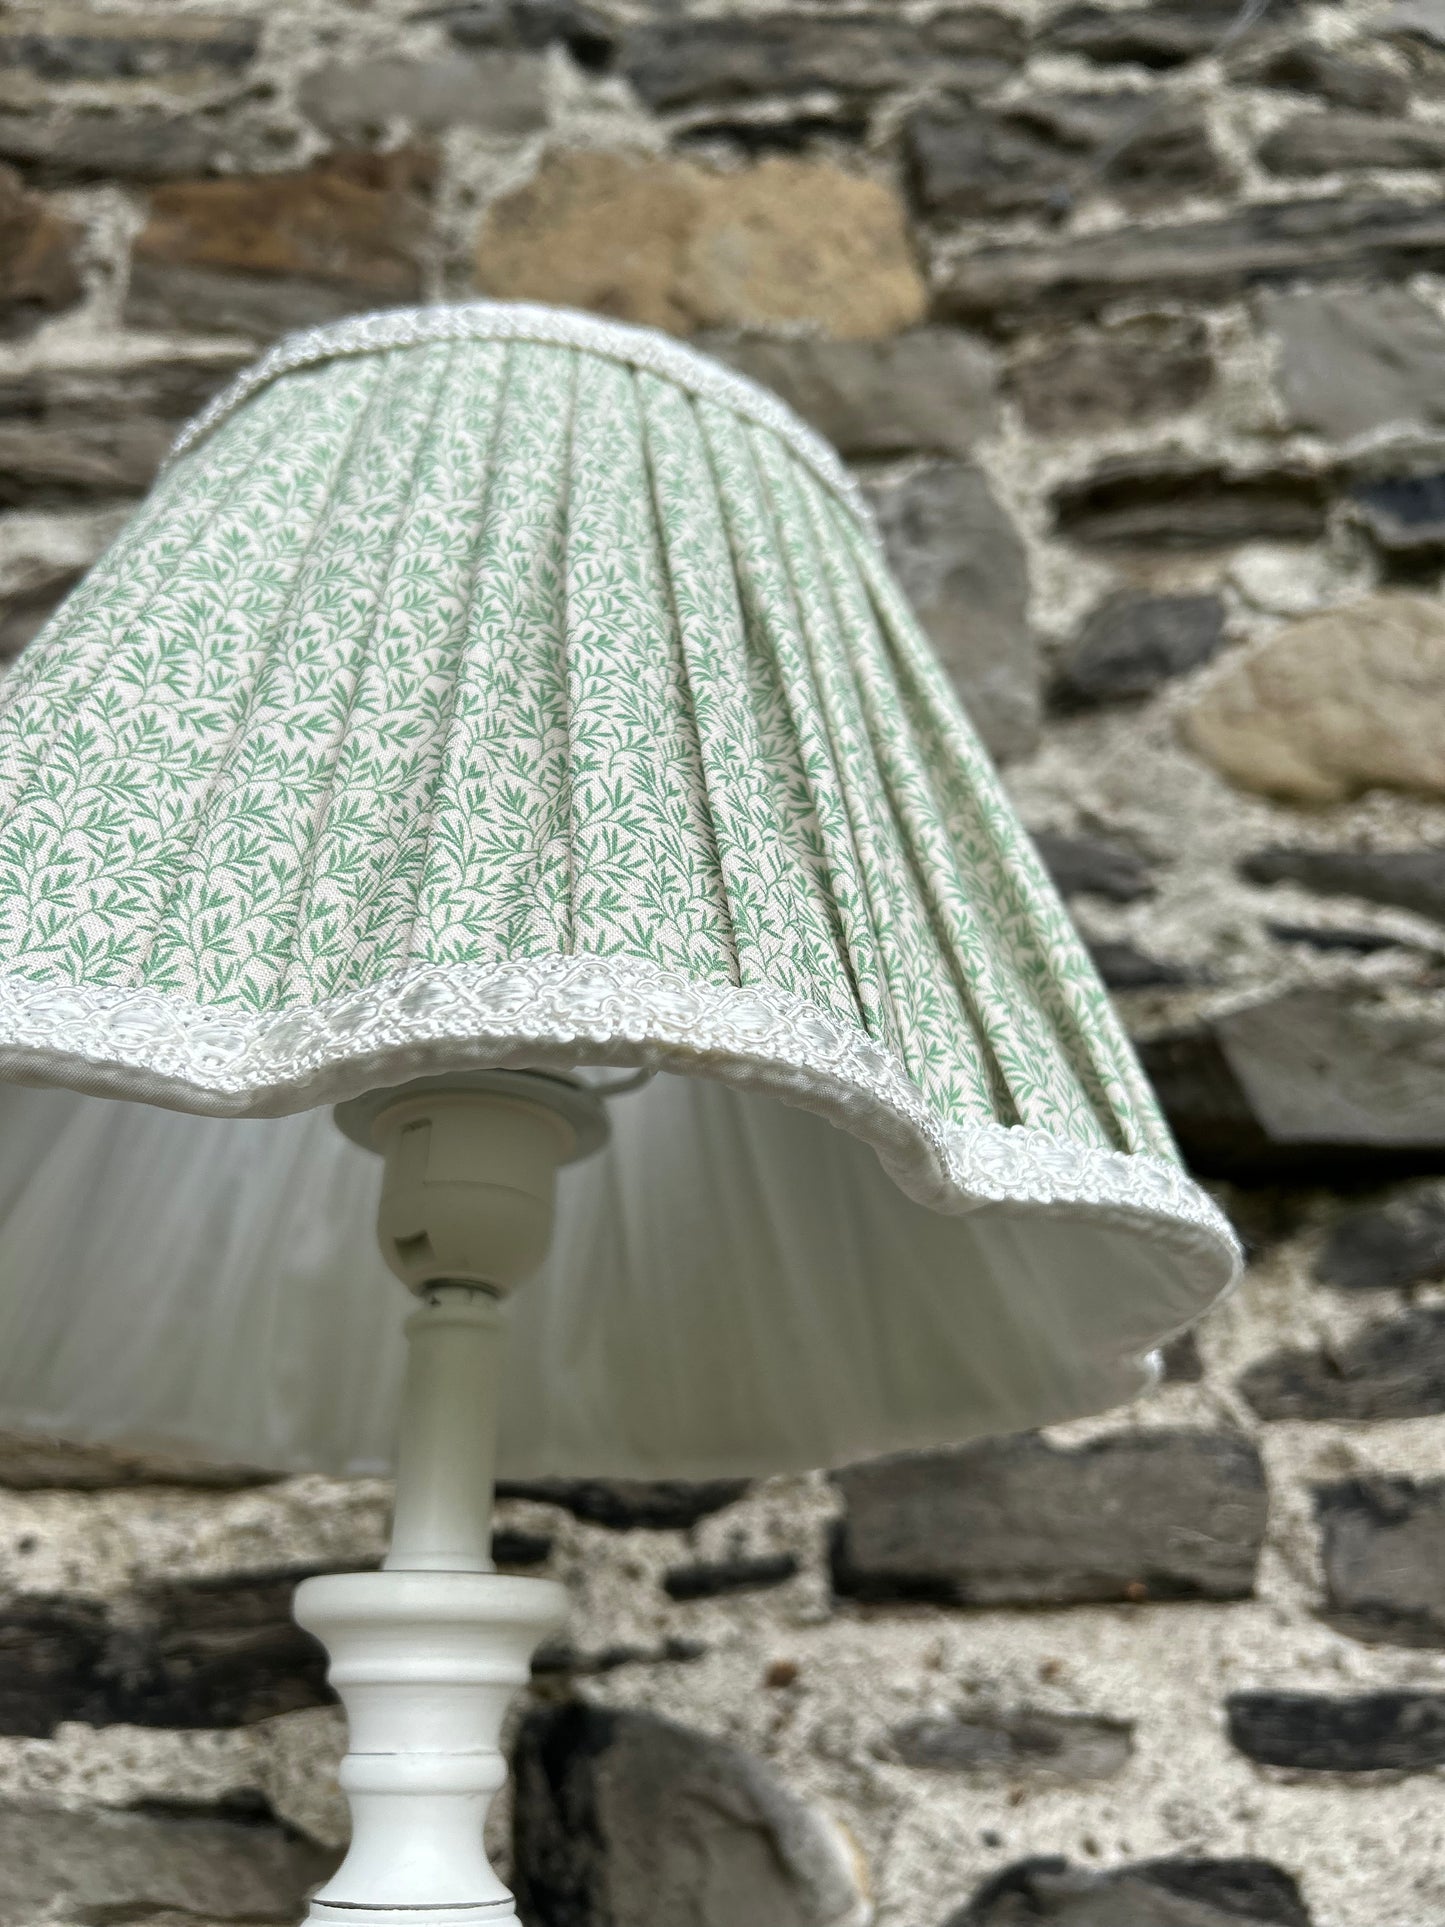 The Collection Soft Lampshade Daisy Fern